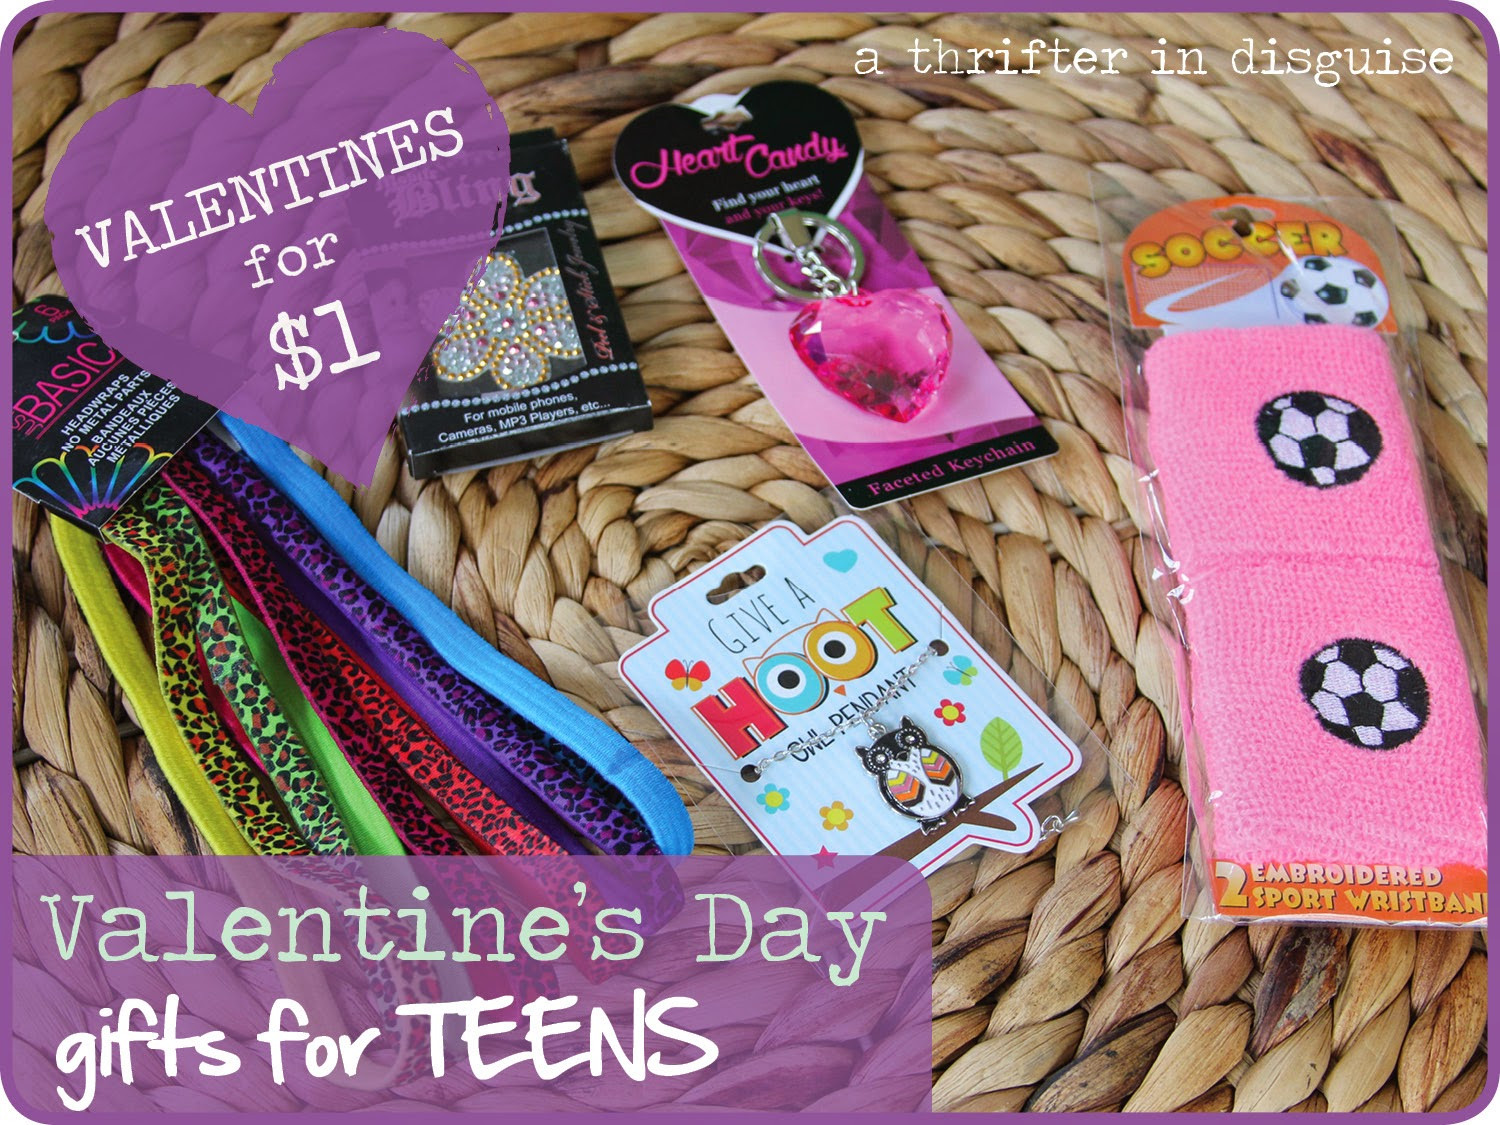 Valentine Gift Ideas For A Teenage Girl
 A Thrifter in Disguise More $1 Valentine s Day Gifts